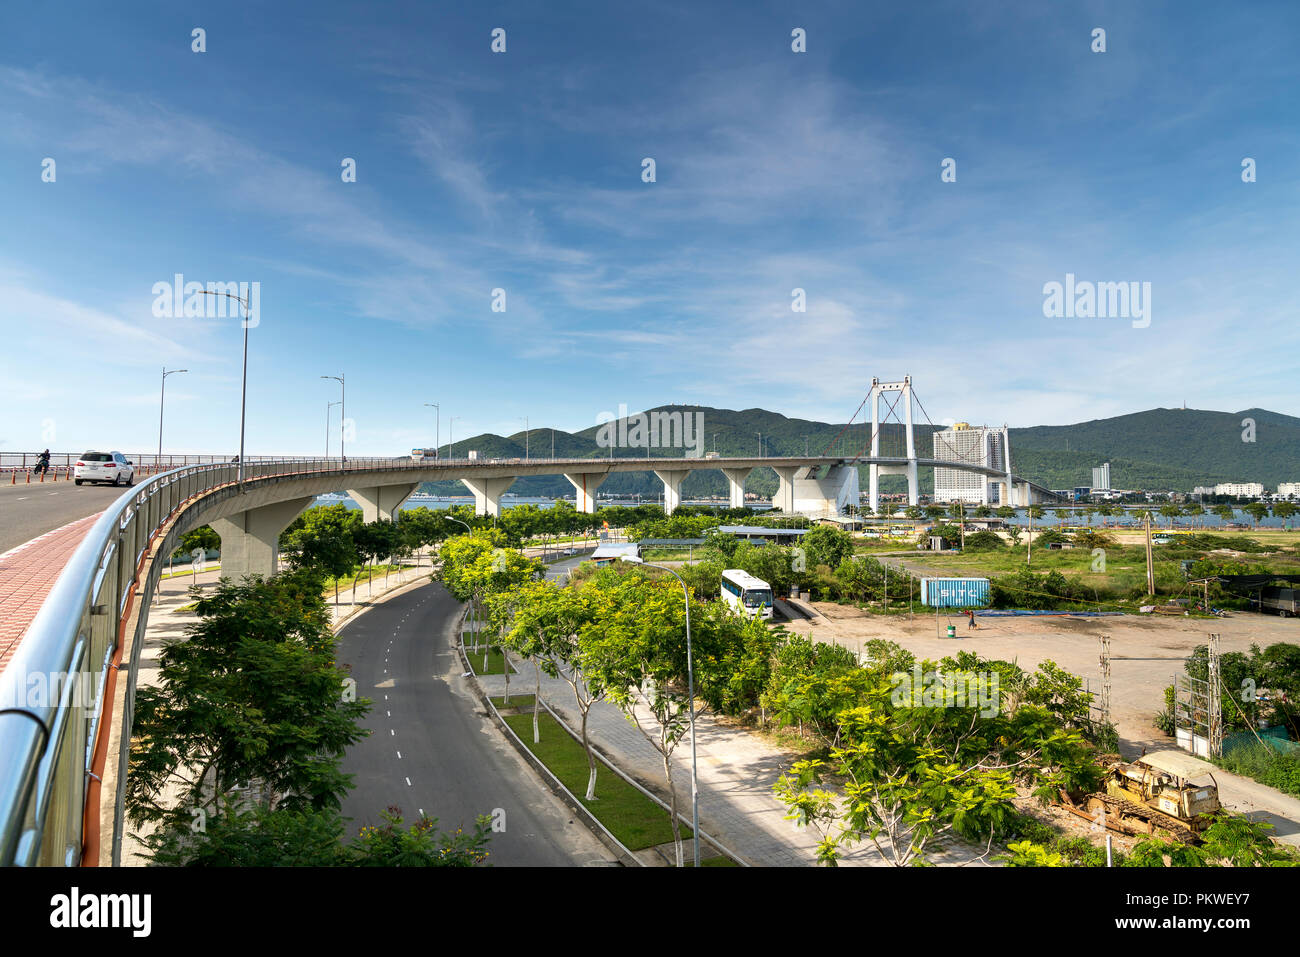 Thuan Phuoc bridge on Han river in DaNang, Vietnam. Da Nang City is a famous city for travel in central Vietnam Stock Photo